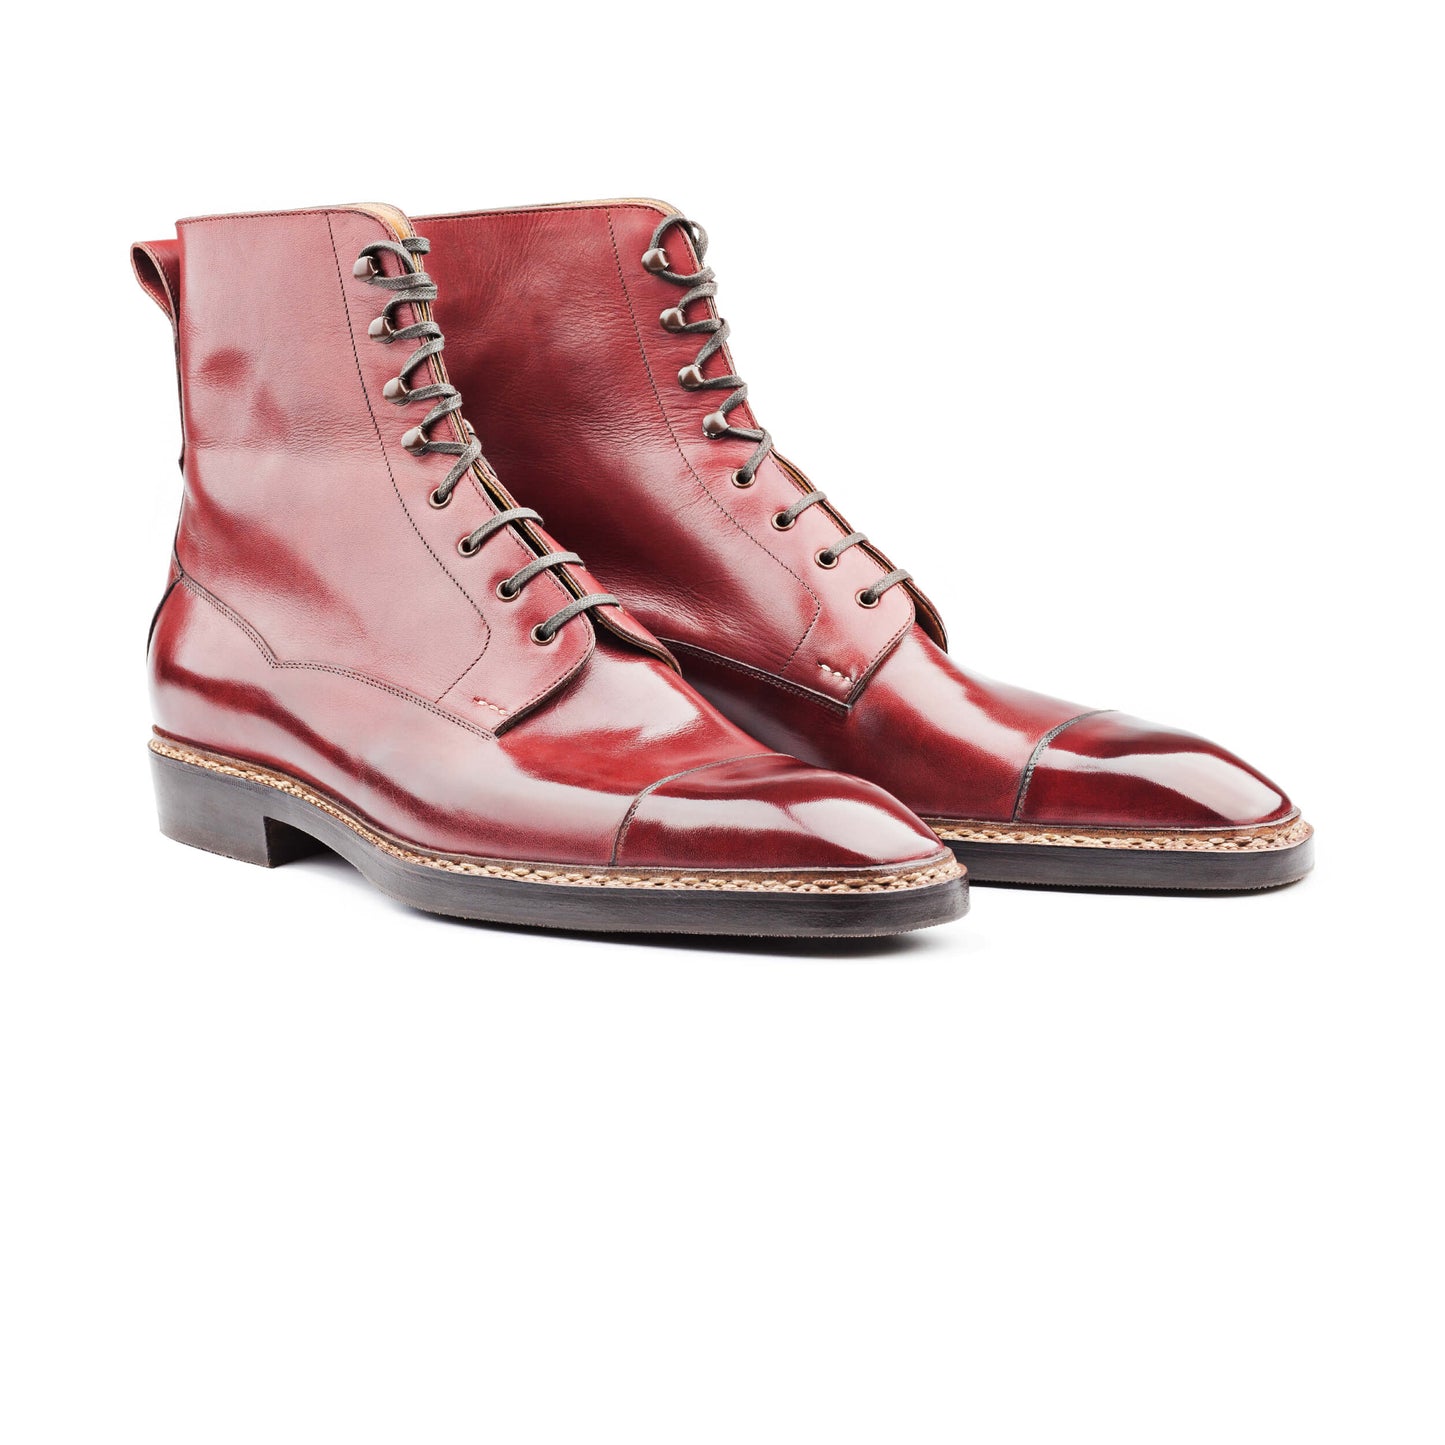 High cut derby boot, with middle tulip cut on sailor last